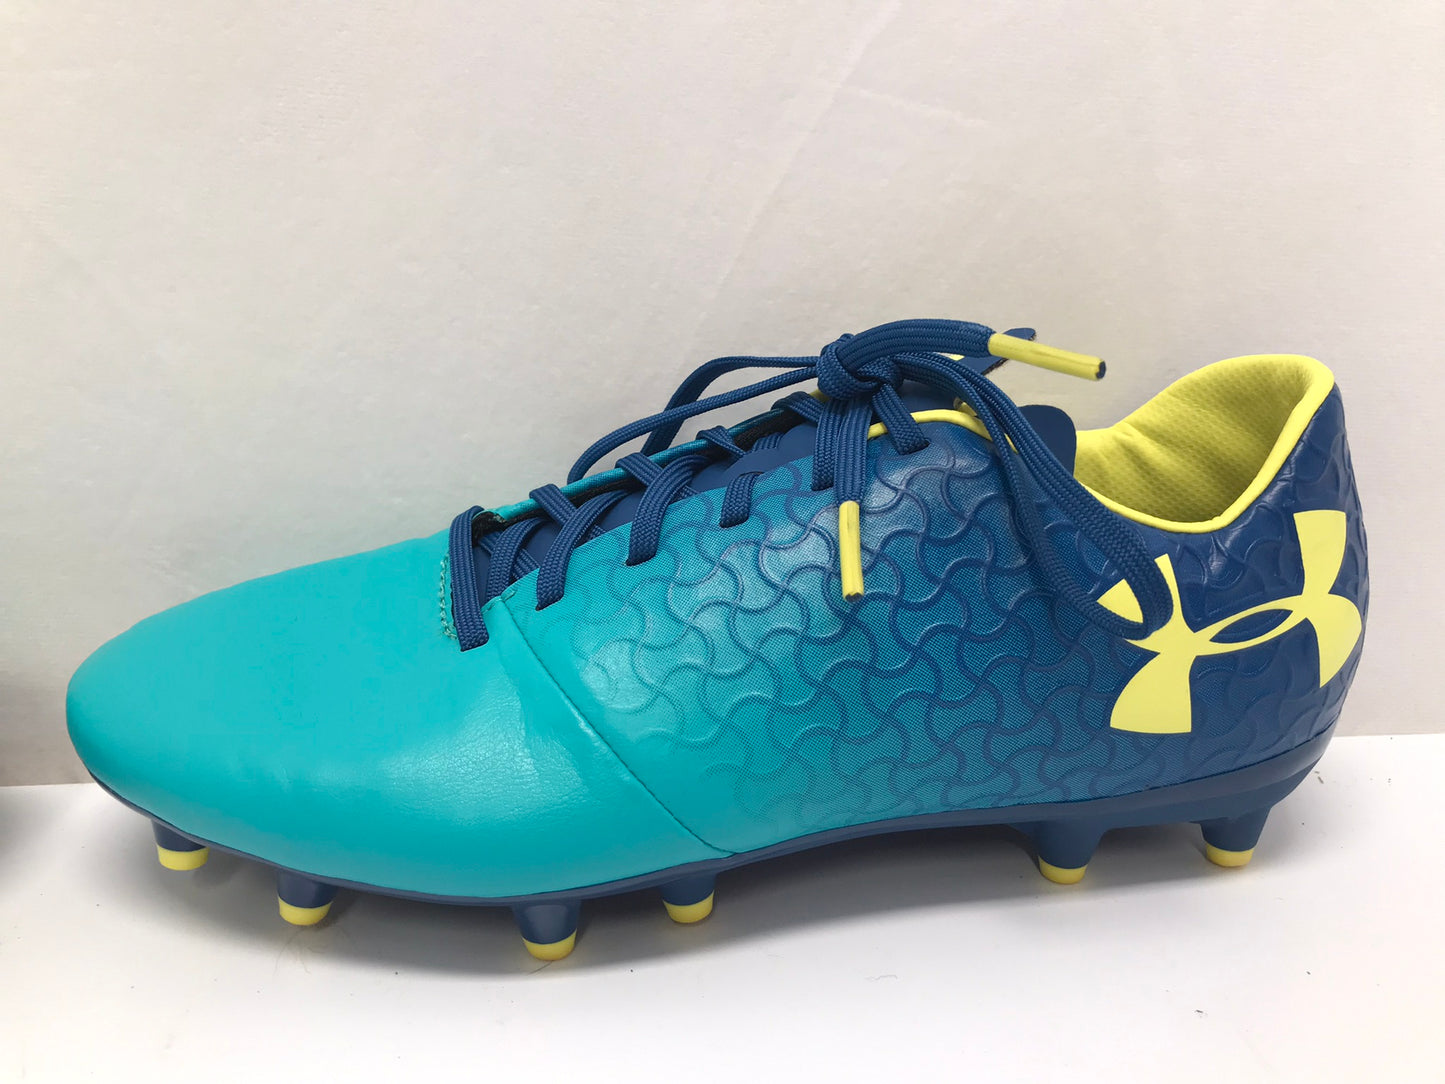 Soccer Shoes Cleats Men's Size 7 Under Armour Magnetico Teal Liime As New